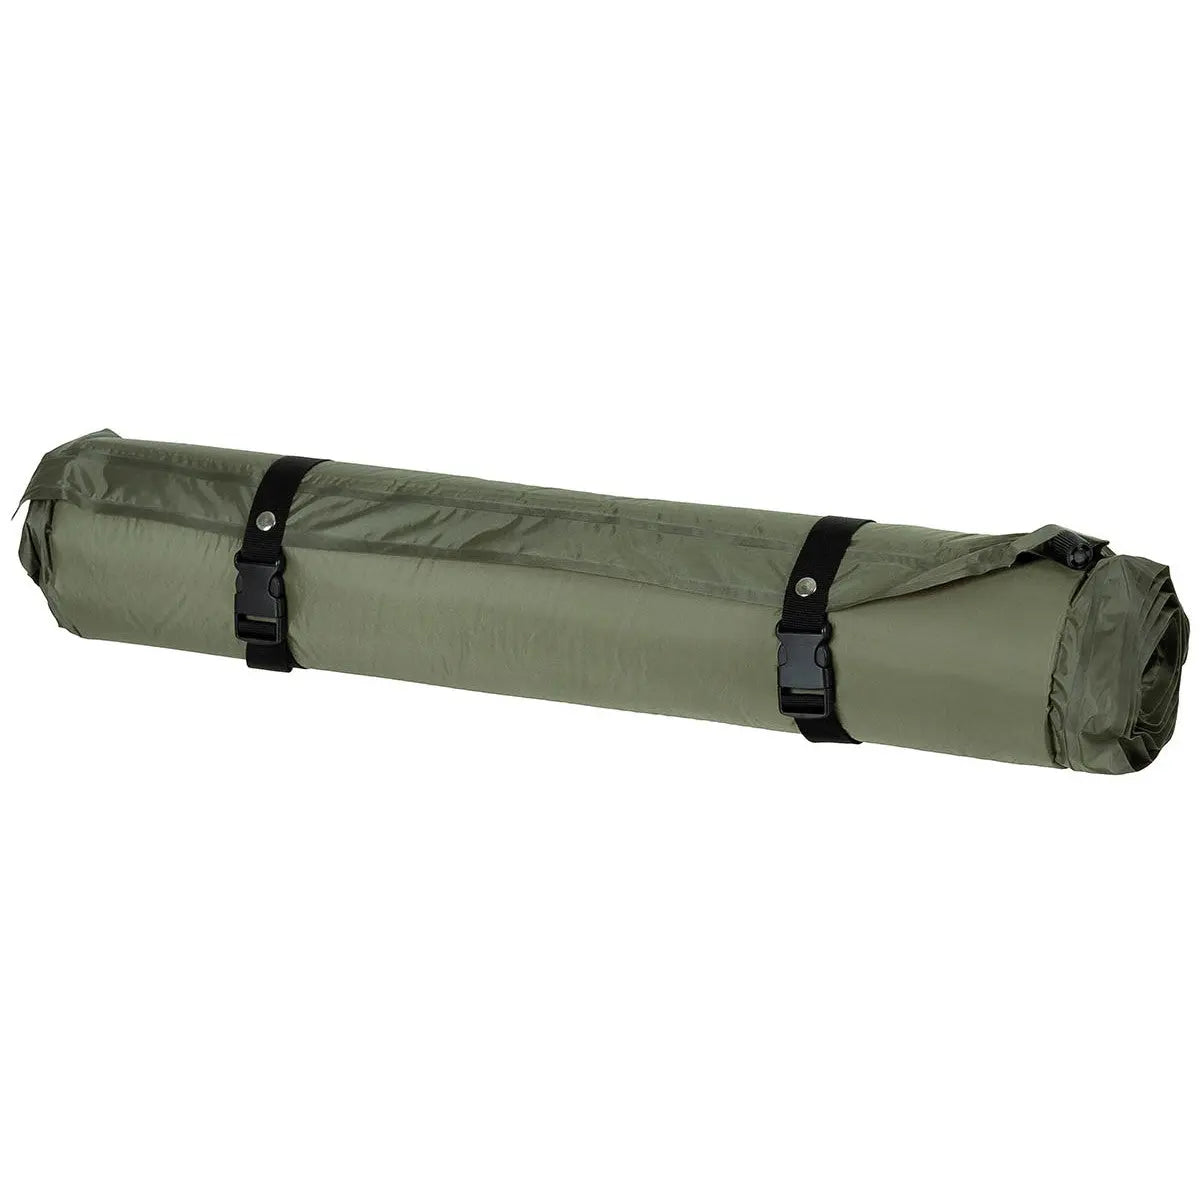 Thermal Pad, self-inflatable, OD green